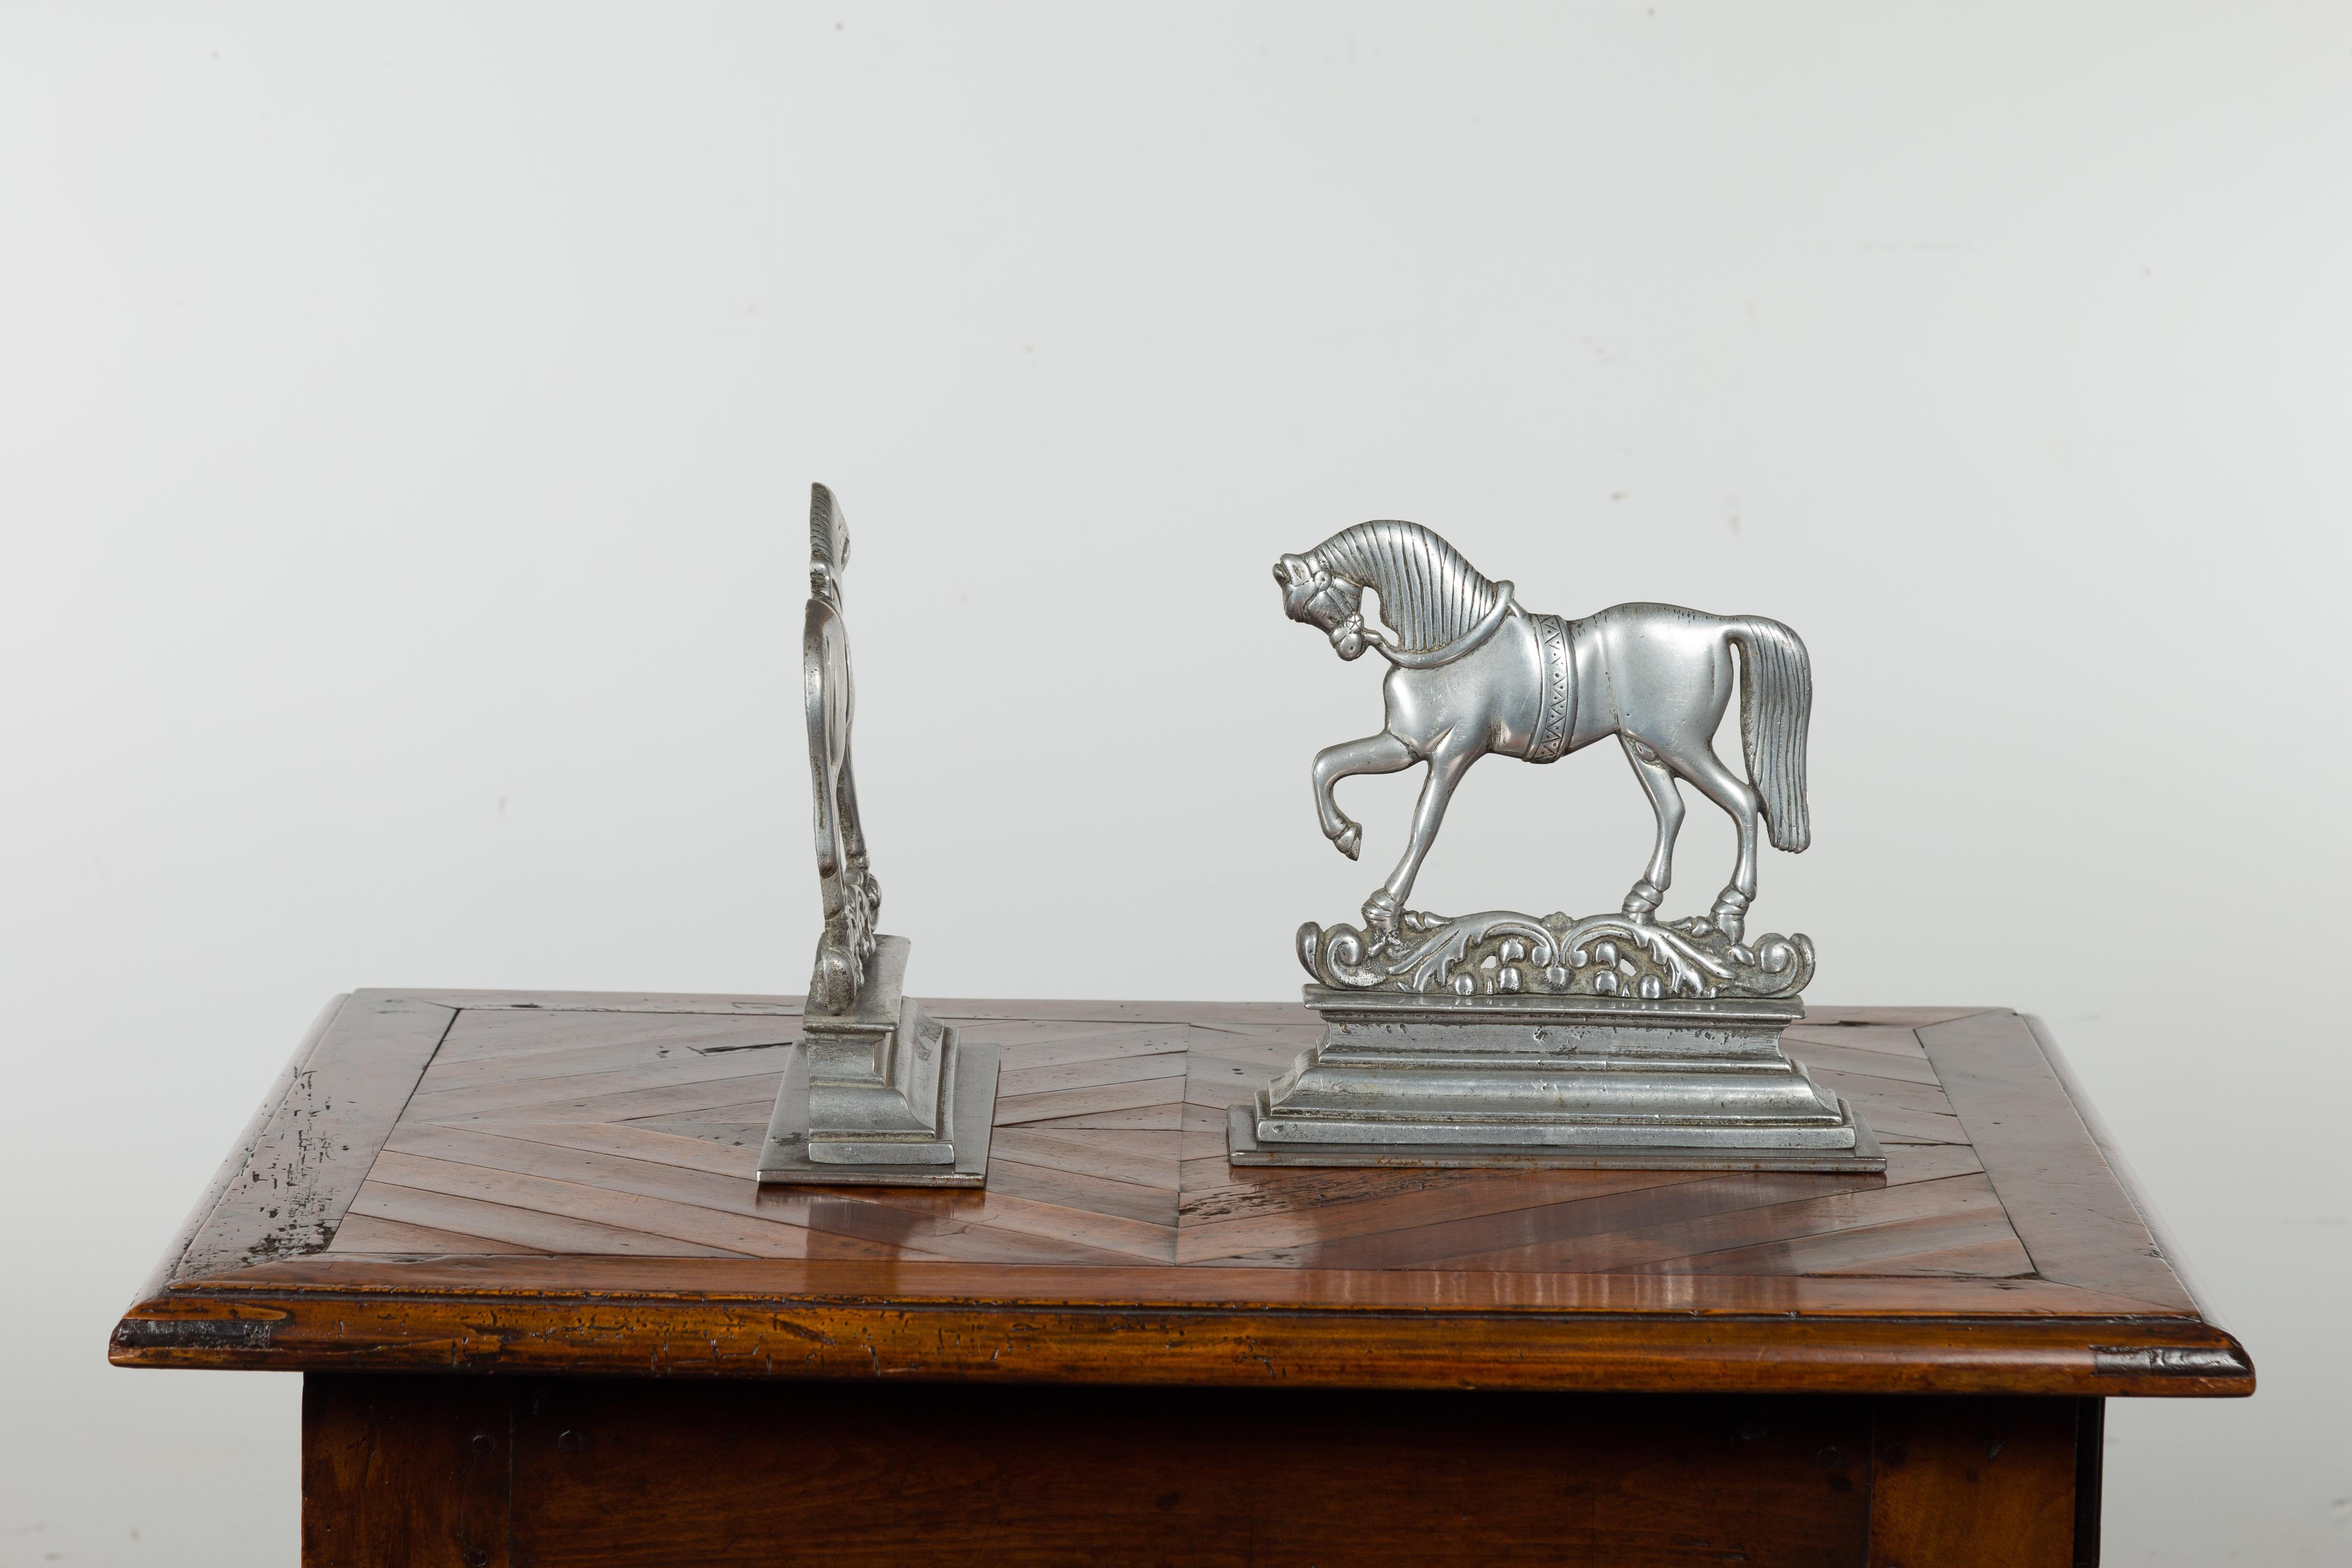 Pair of English Turn of the Century Metal Bookends Depicting Prancing Horses For Sale 10